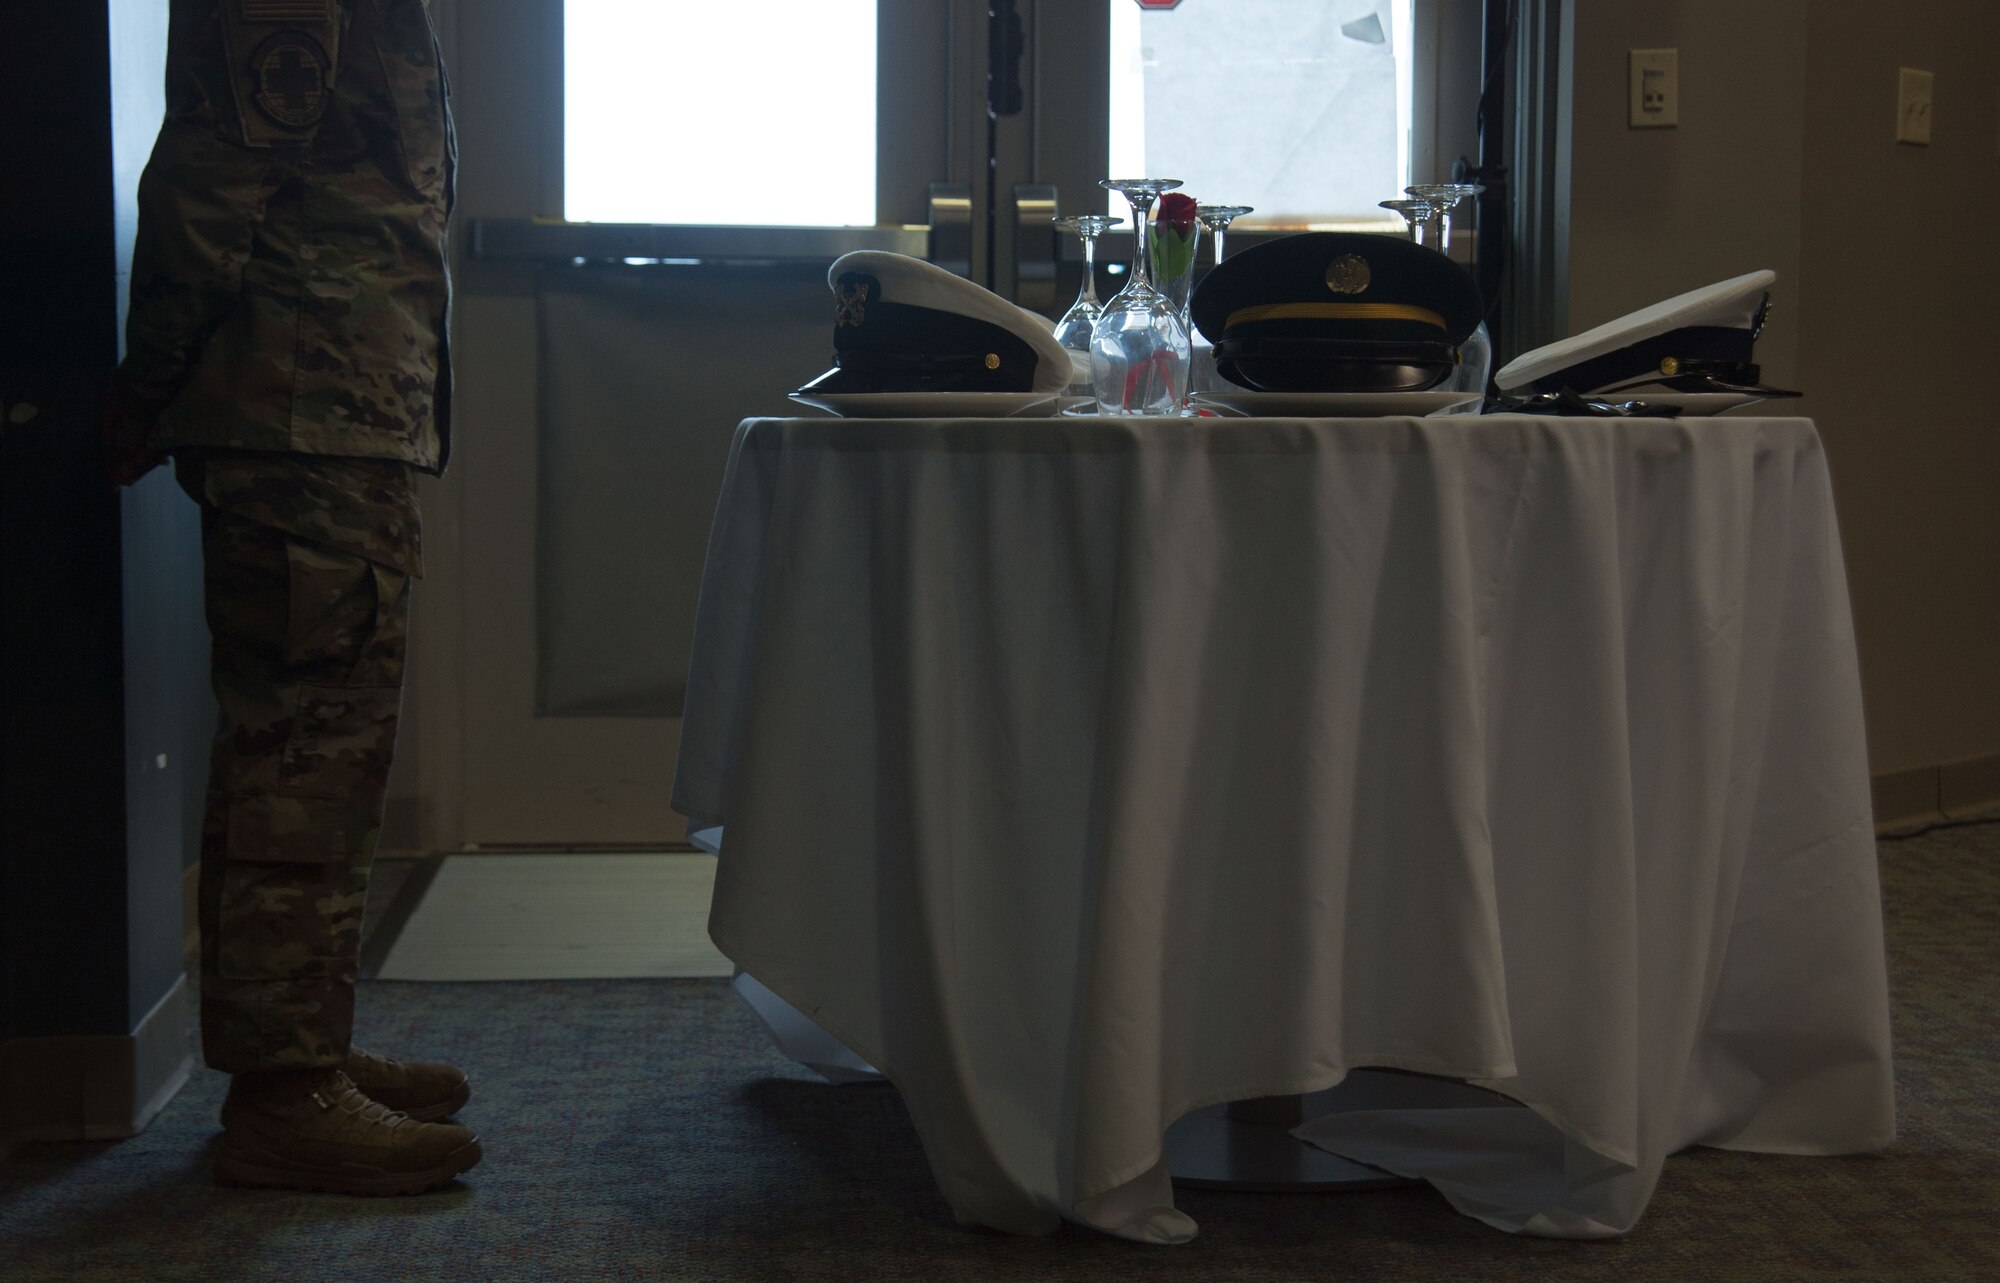 An Airman stands behind a table.